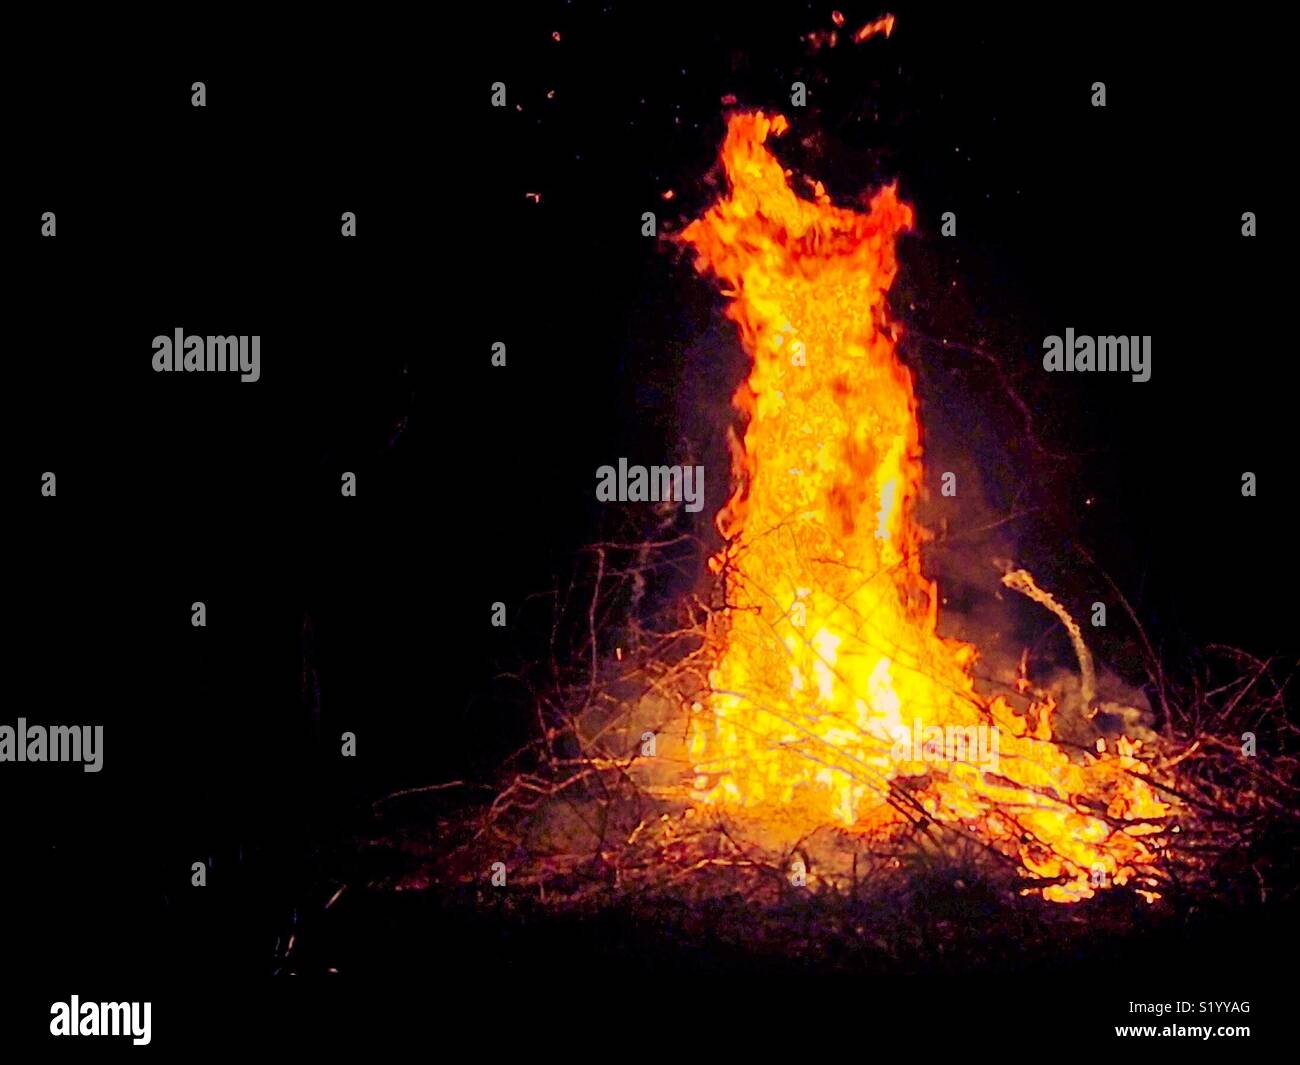 Burst of tall flames resembling evening gown Stock Photo